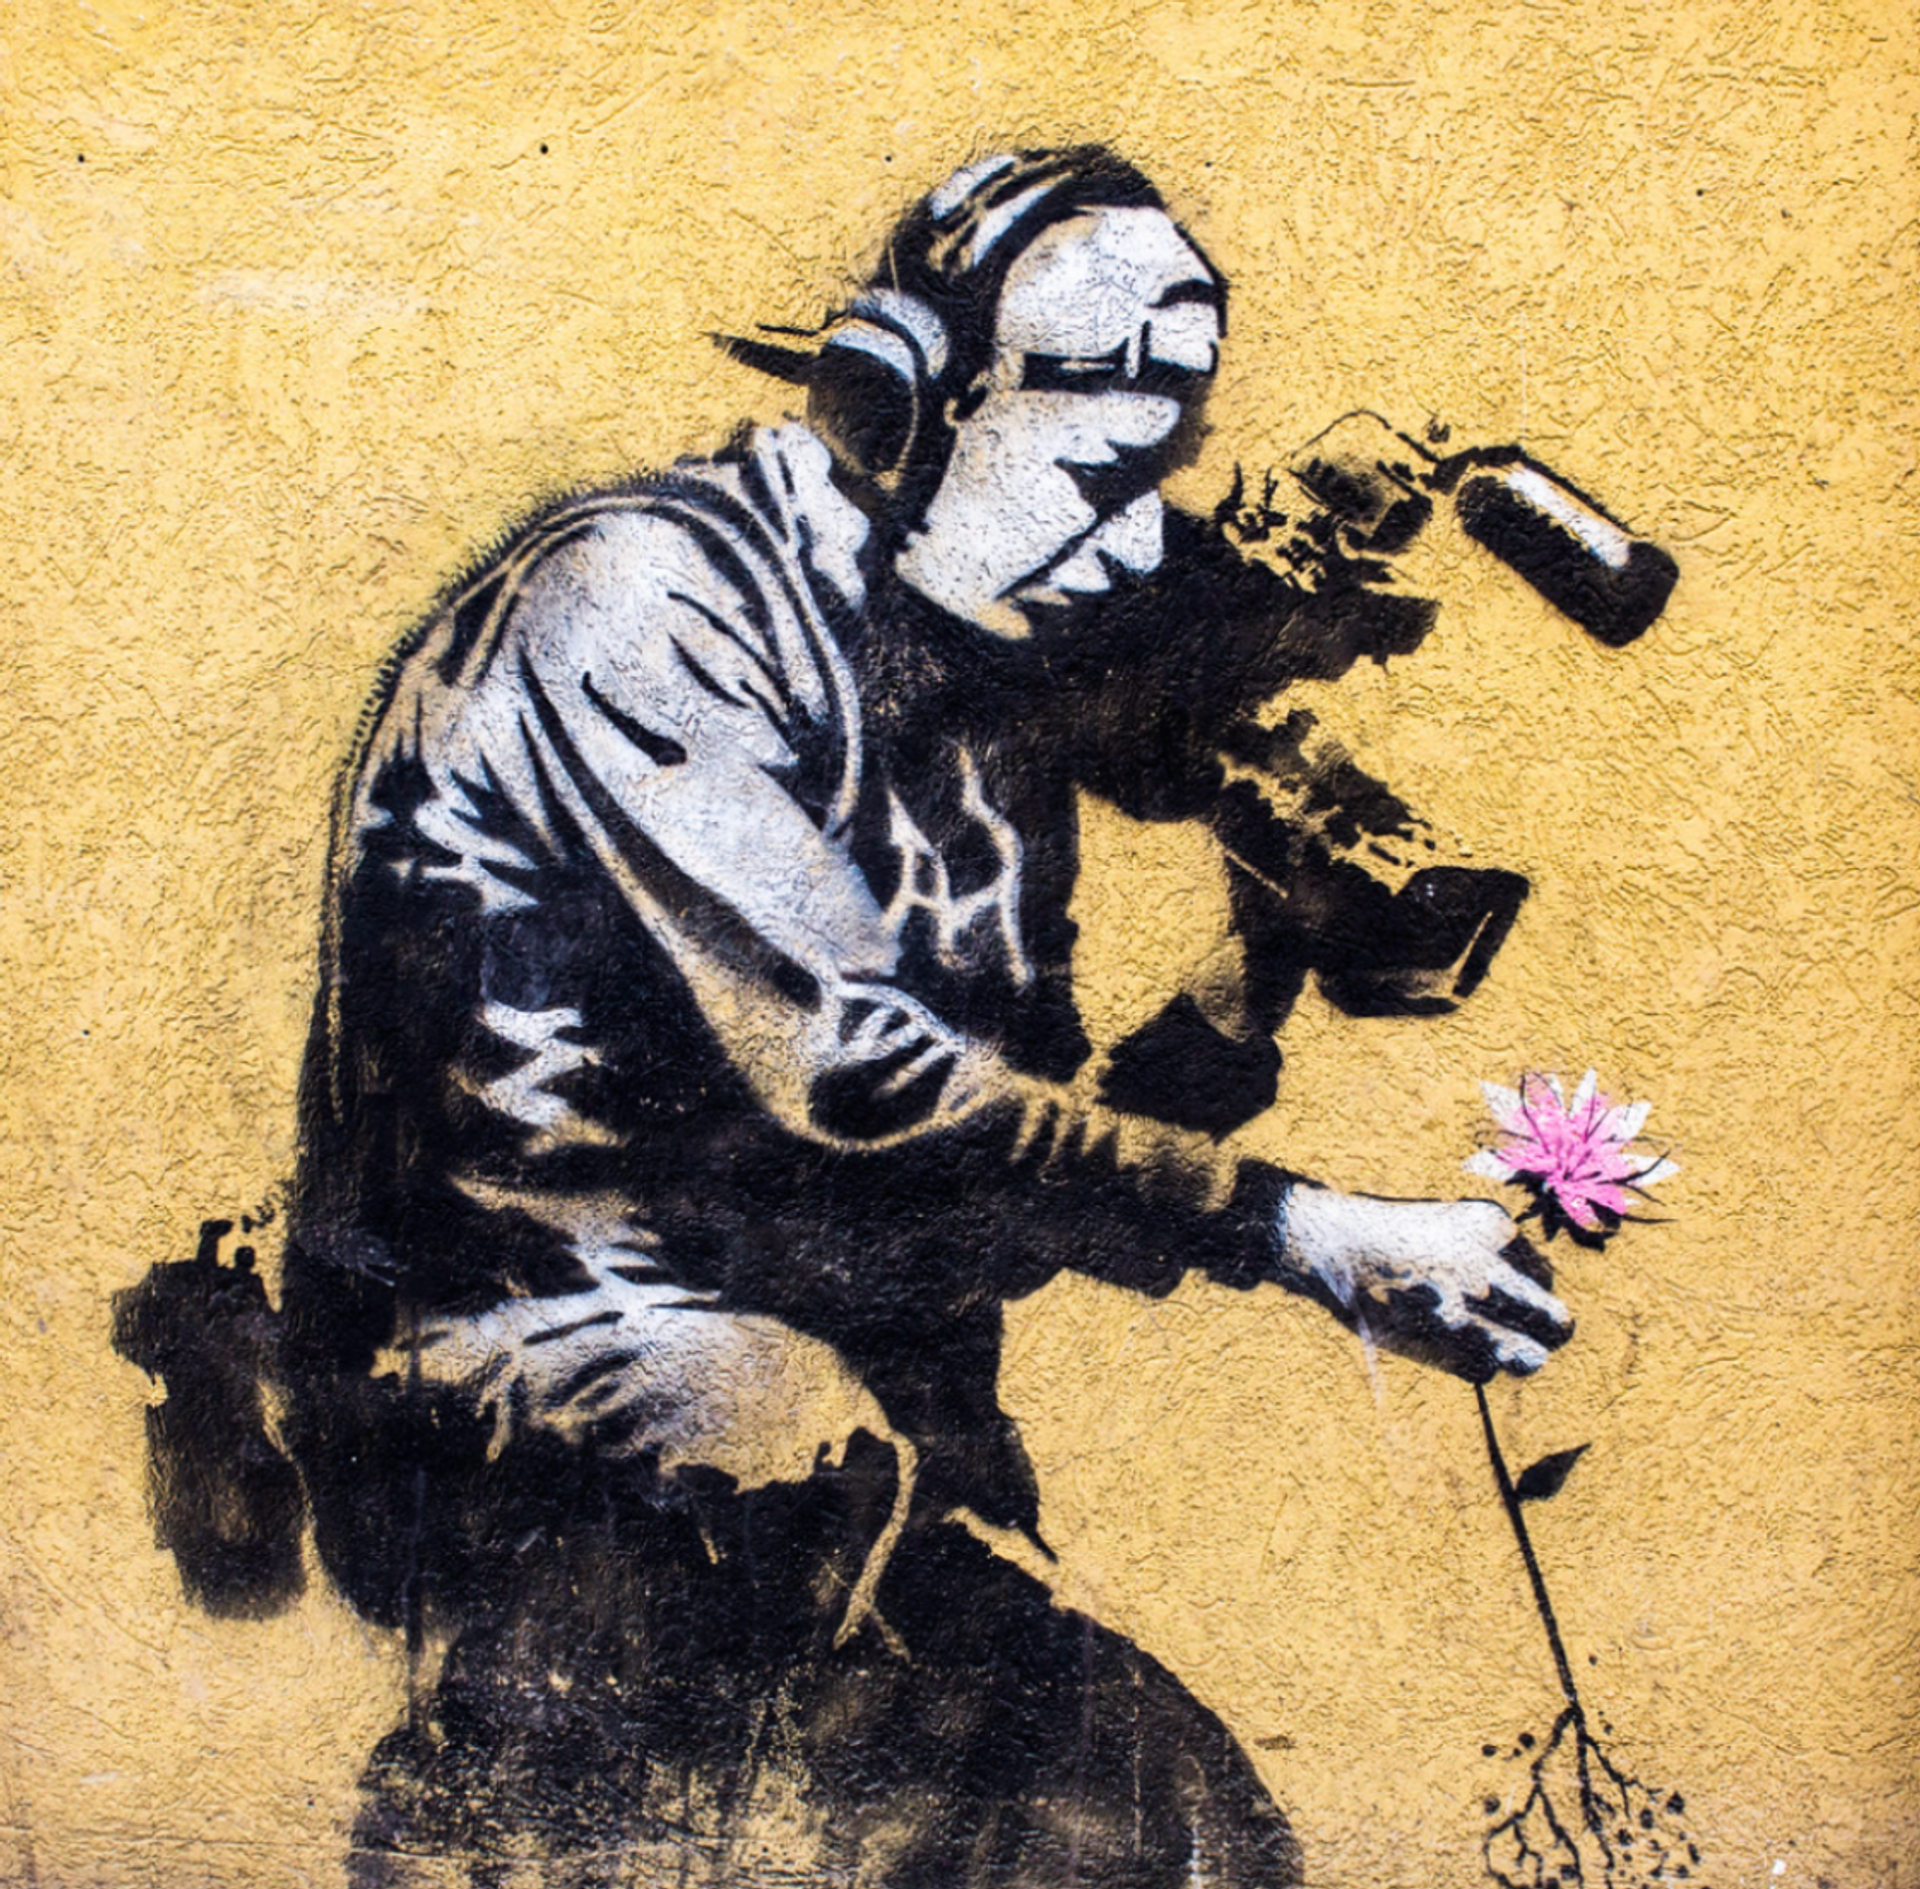 Camera Man and Flower by Banksy